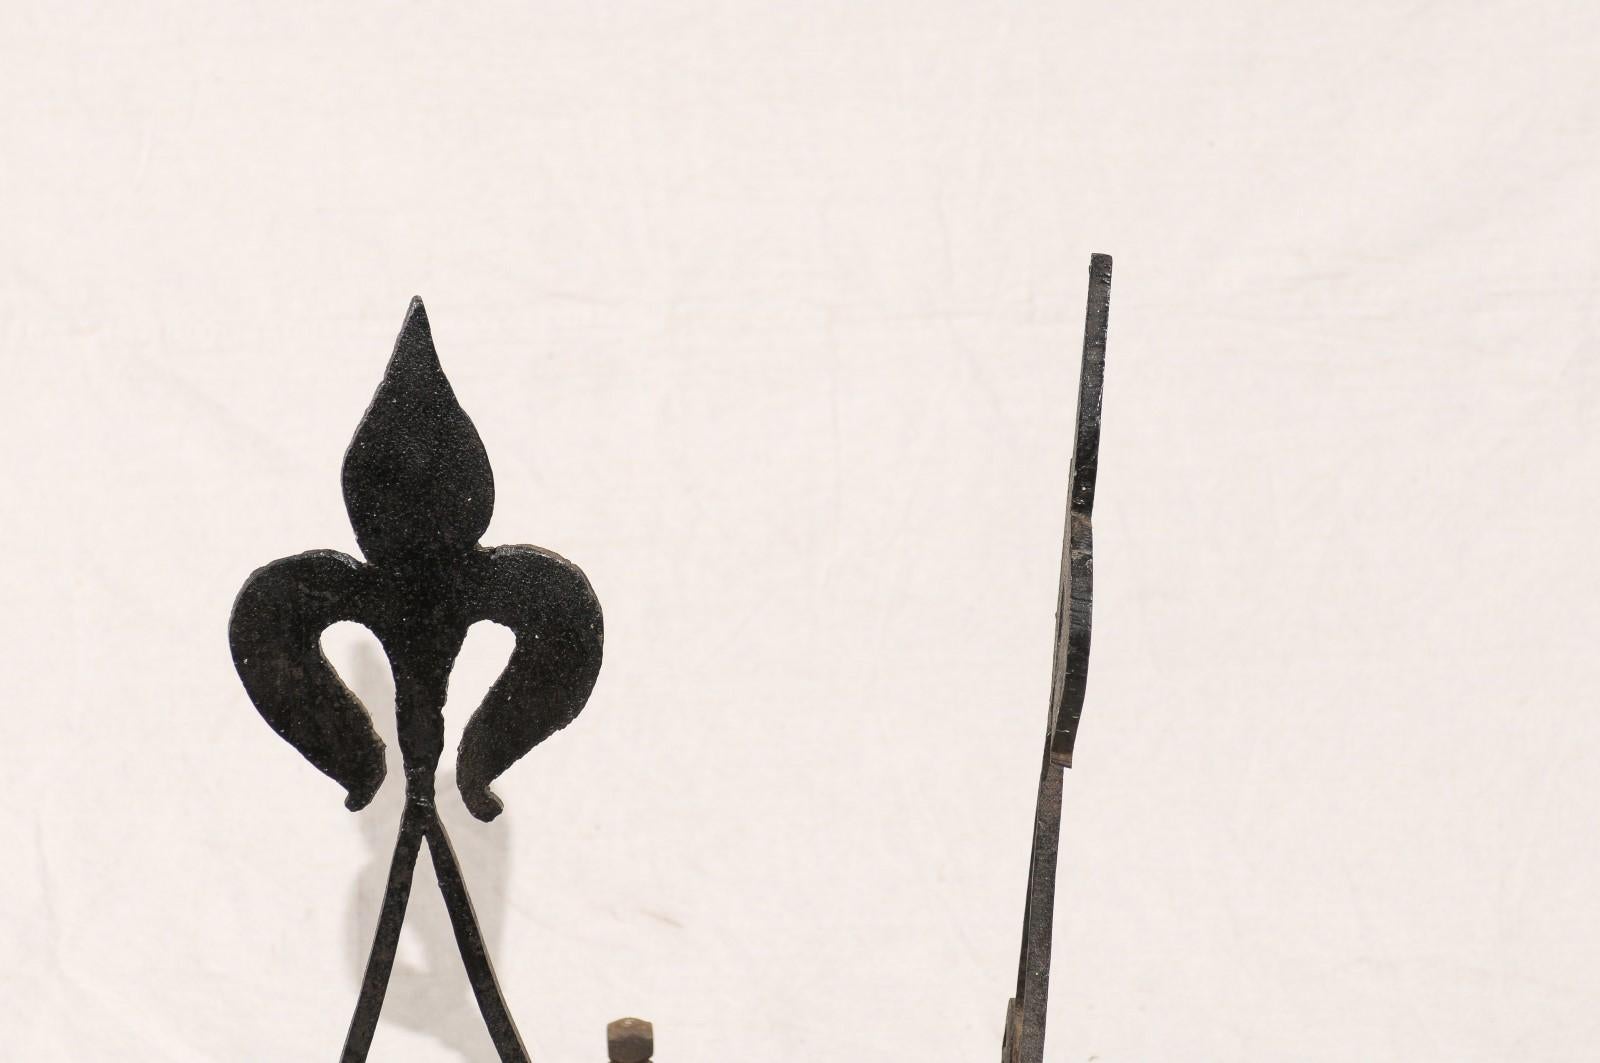 Pair of Late 19th-Early 20th Century American Black Fleur-de-Lis Andirons For Sale 5